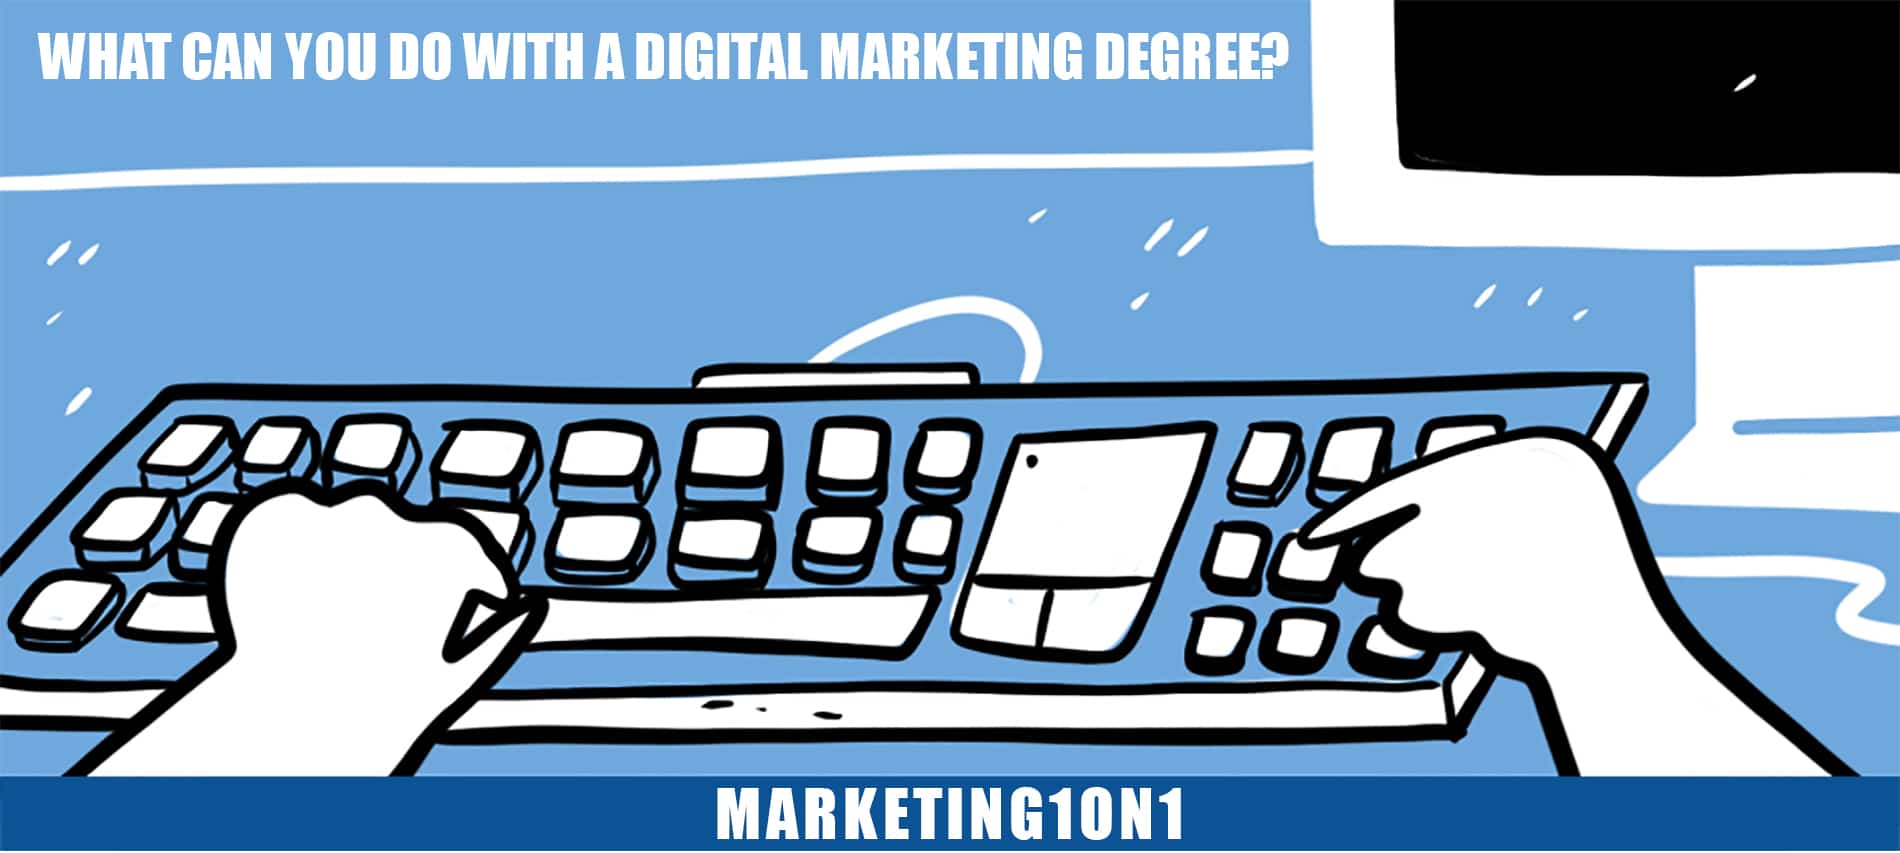 What can you do with a digital marketing degree?